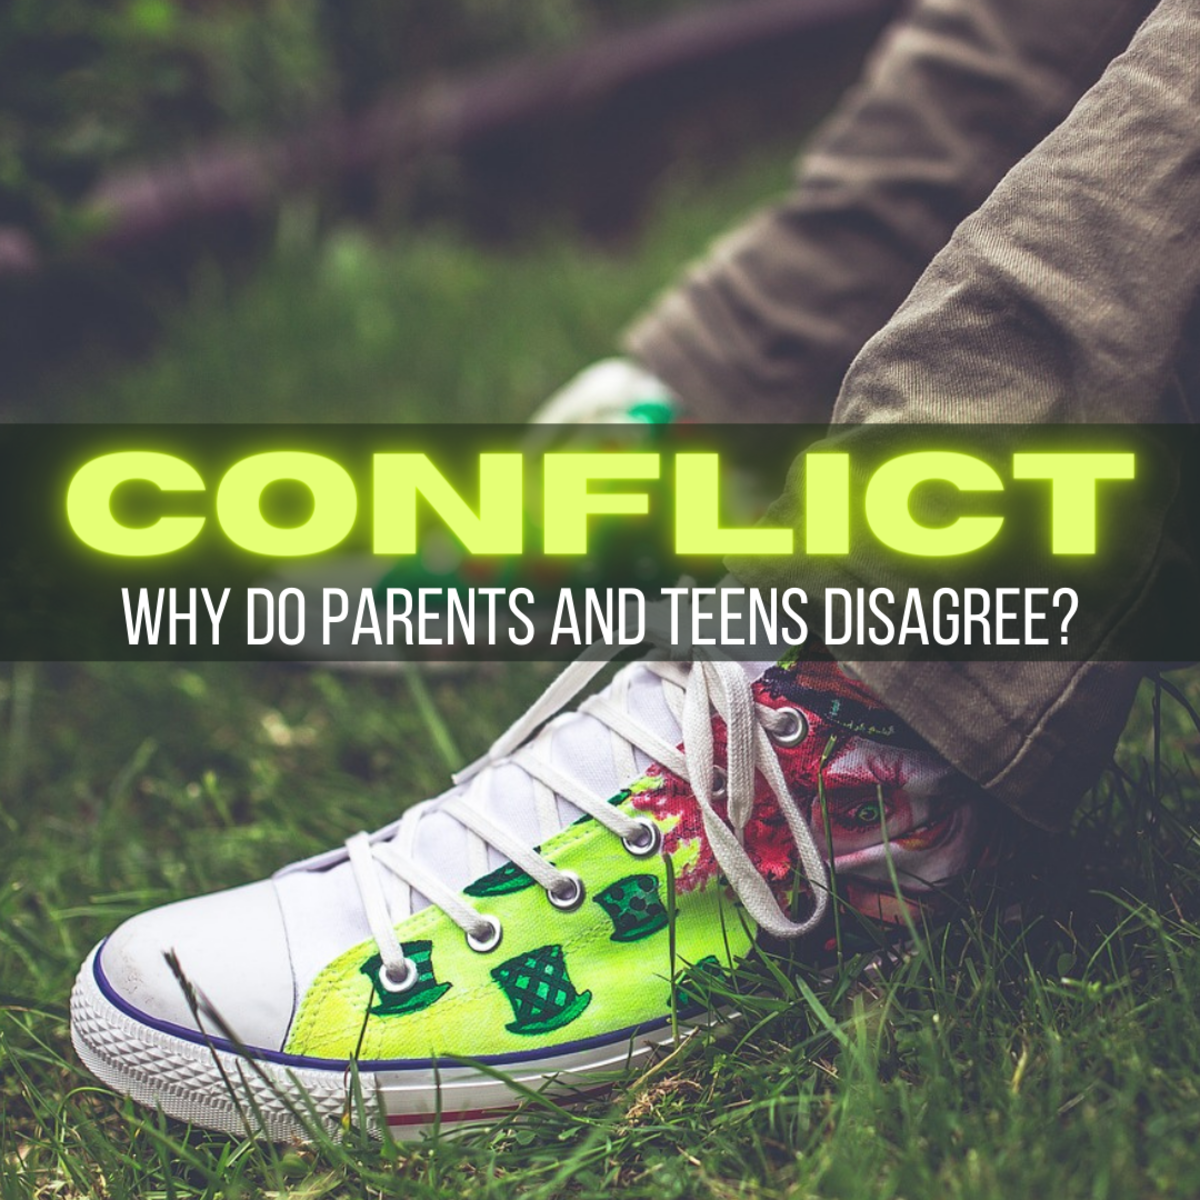 Causes of Conflict Between Parents and Teenagers